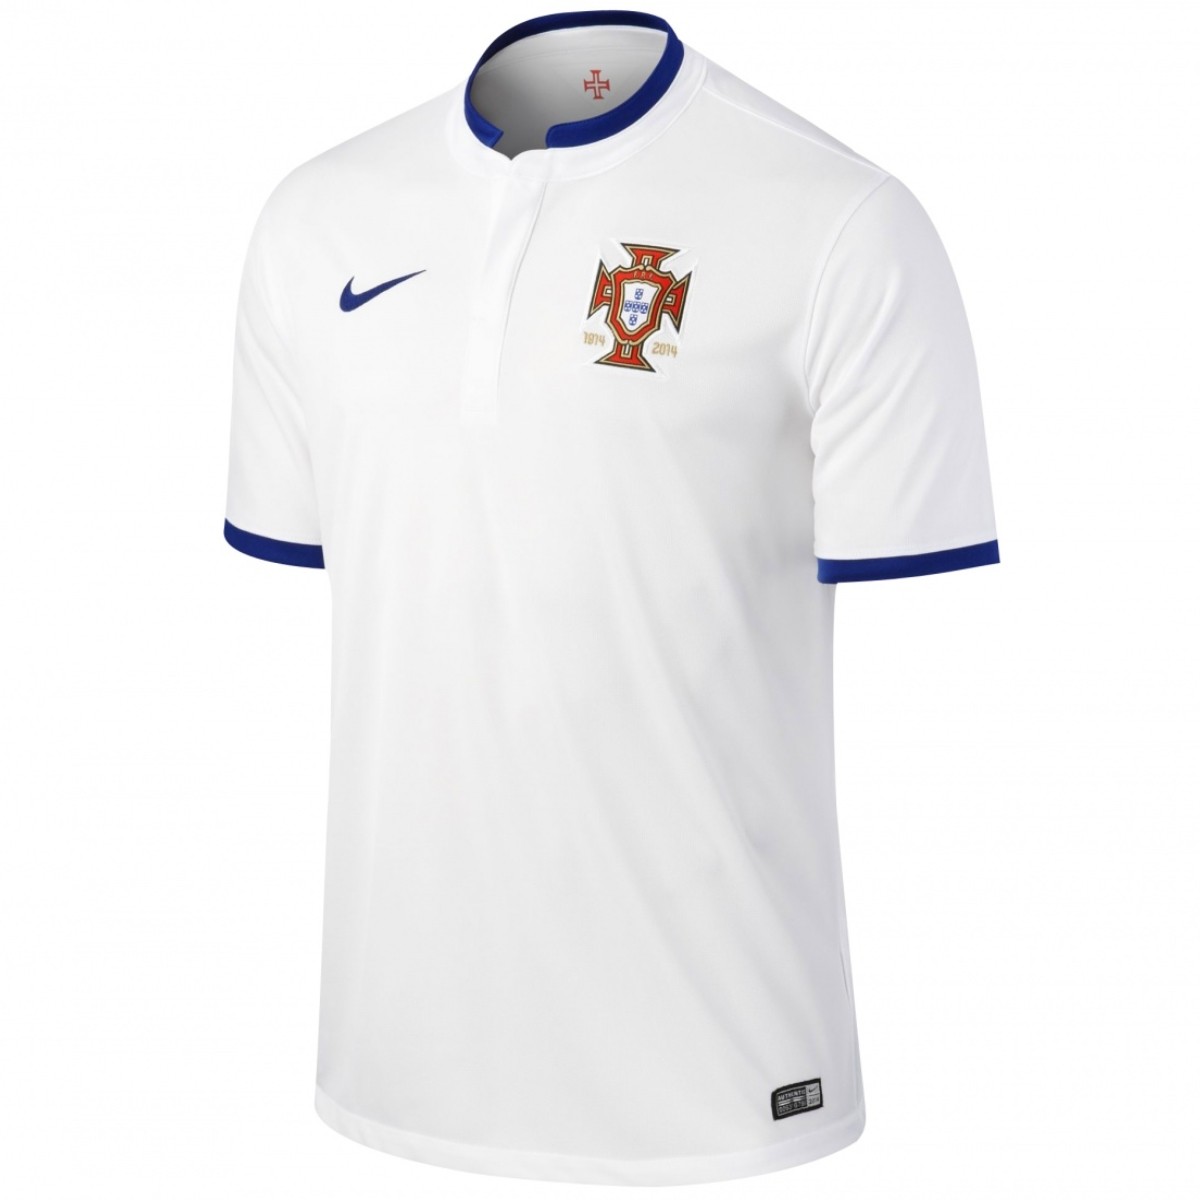 portugal soccer jersey 2014